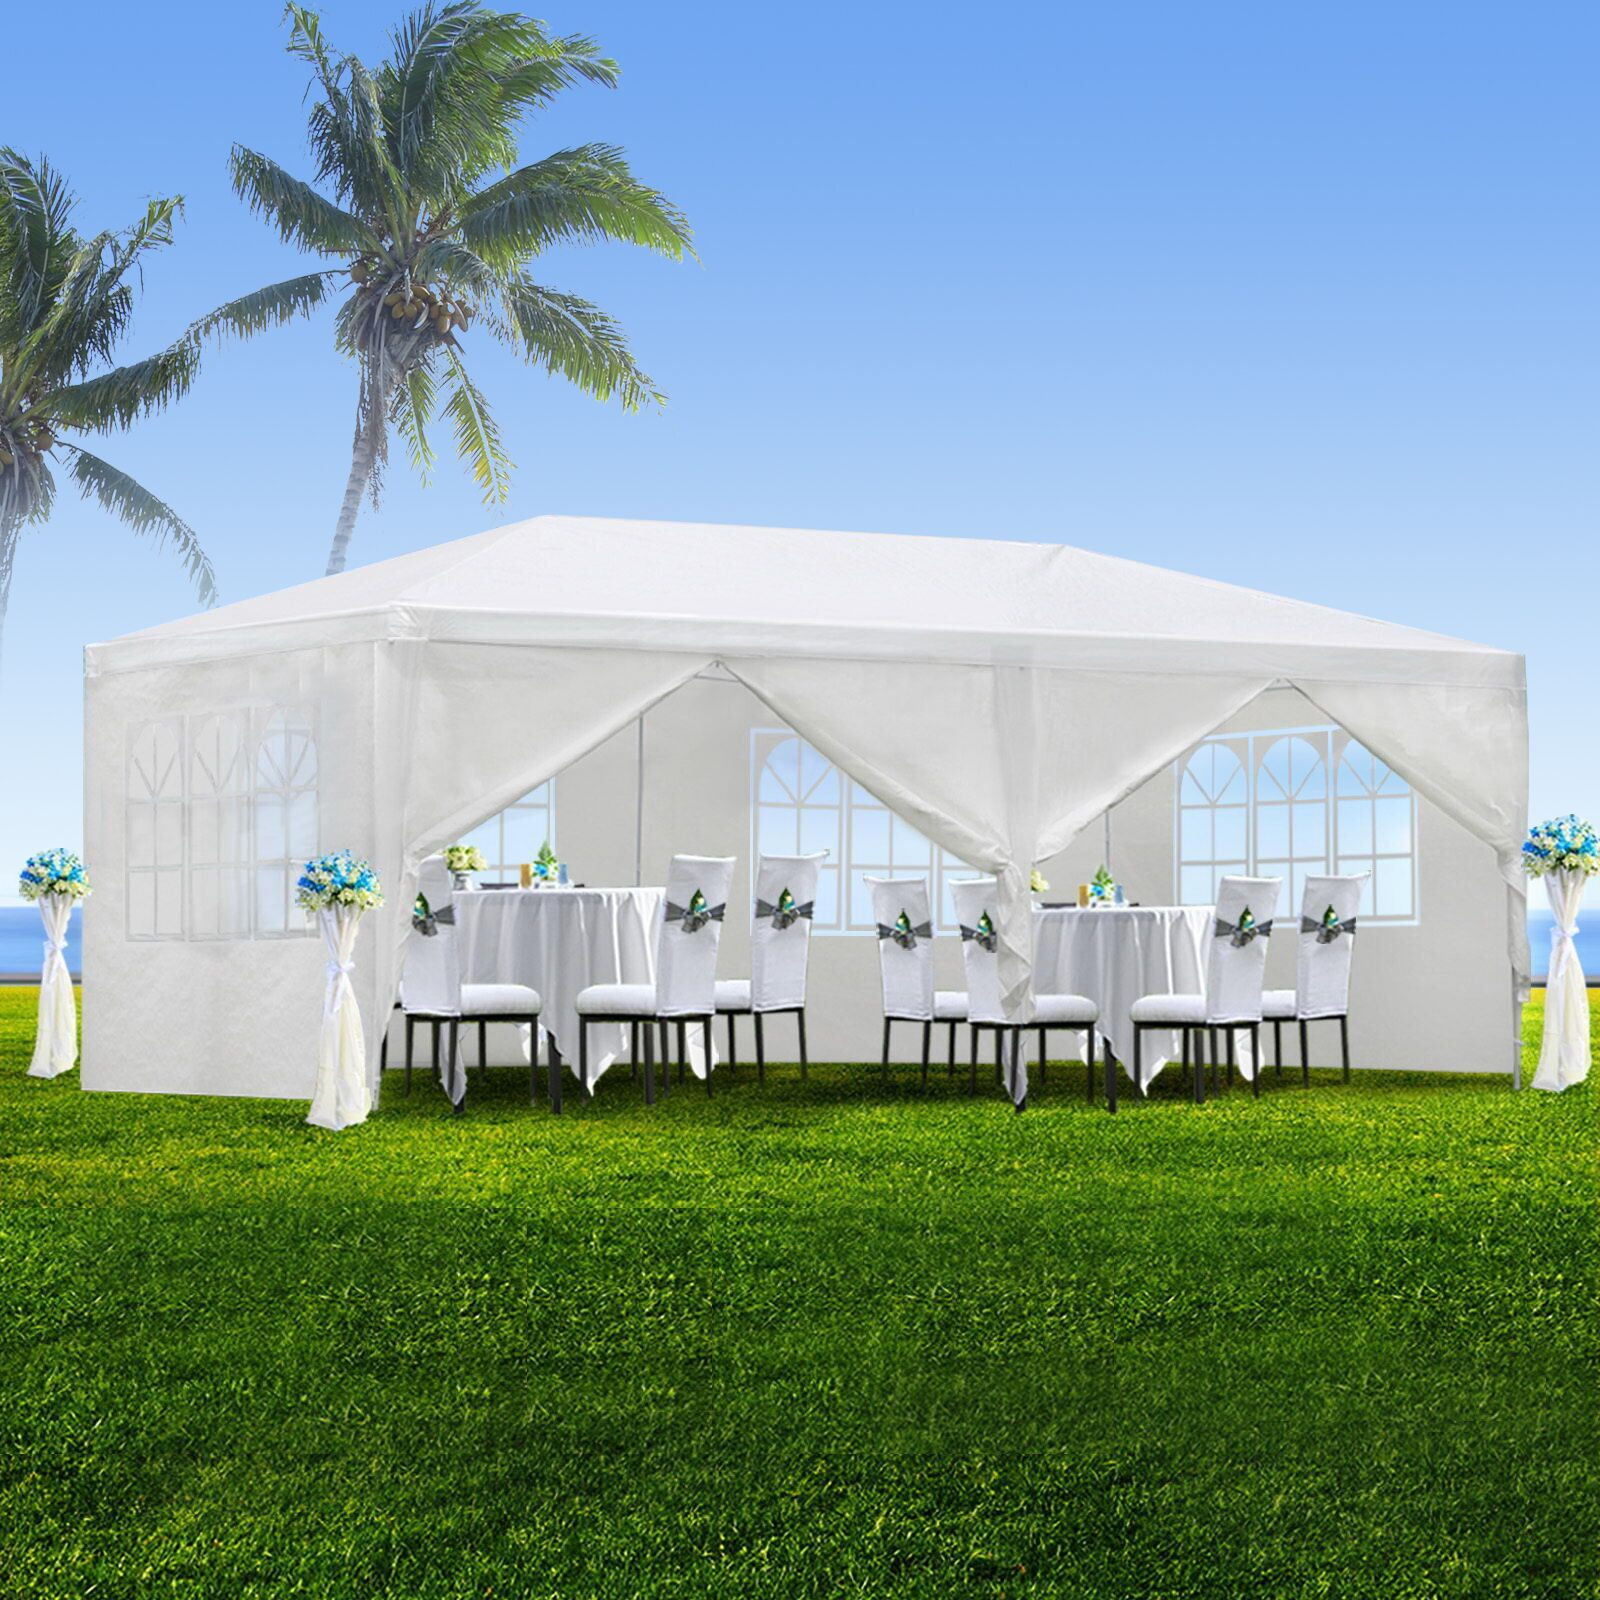 Backyard Party Tents
 Zeny 10 x20 Outdoor Canopy Party Wedding Tent White